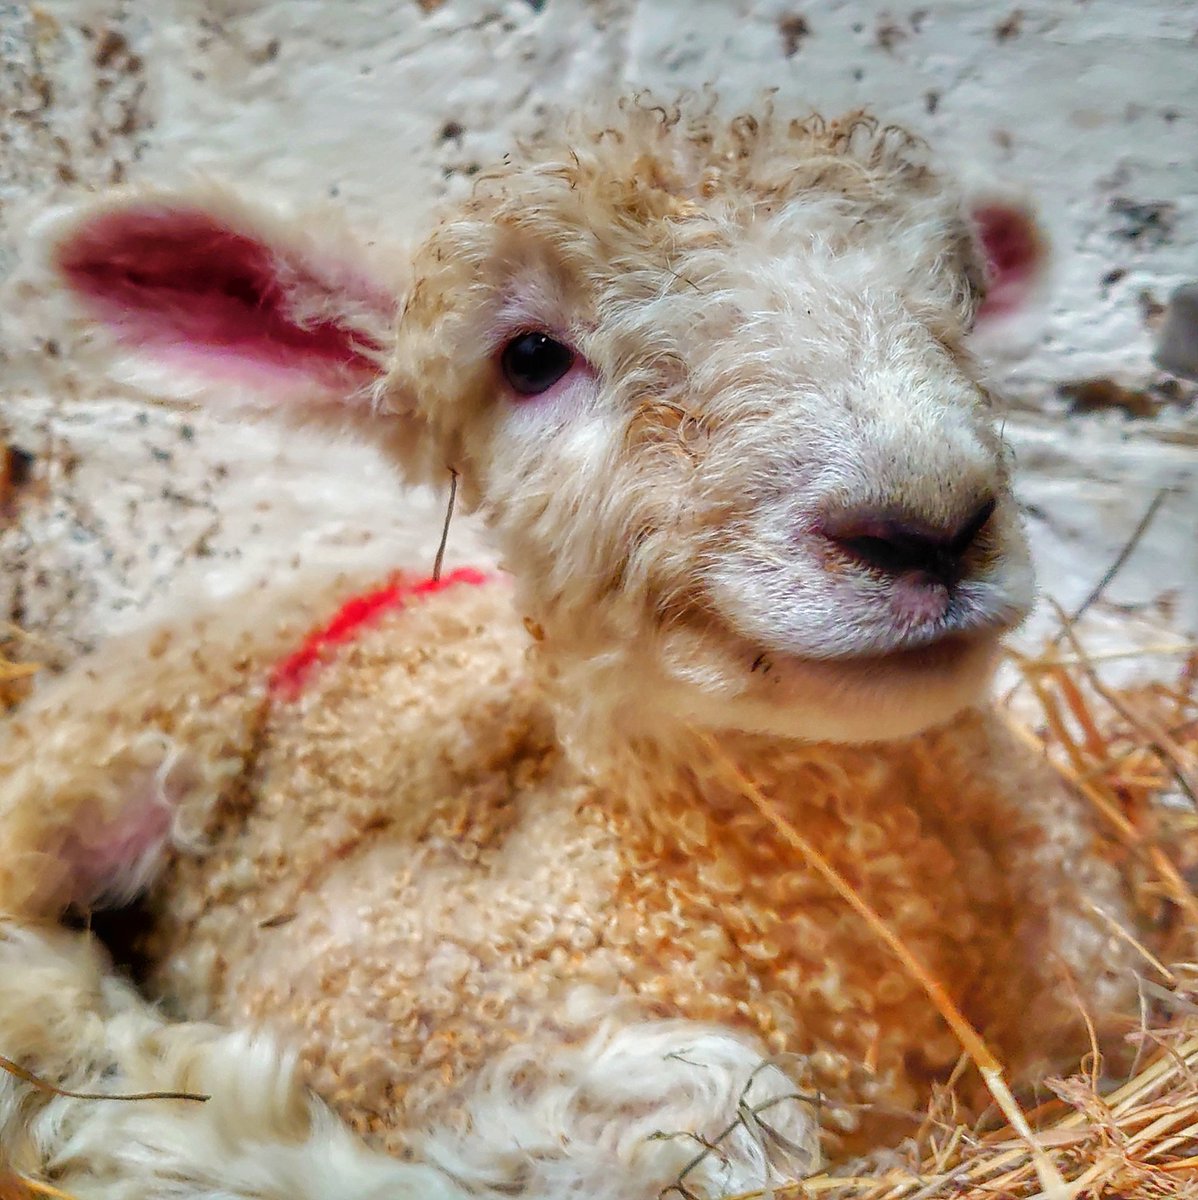 One of our new lambs tucked happily away from the wind and rain. This one is a female. #happylamb #smileylamb #lambing2020 #lovealongwool #lincolnlongwool